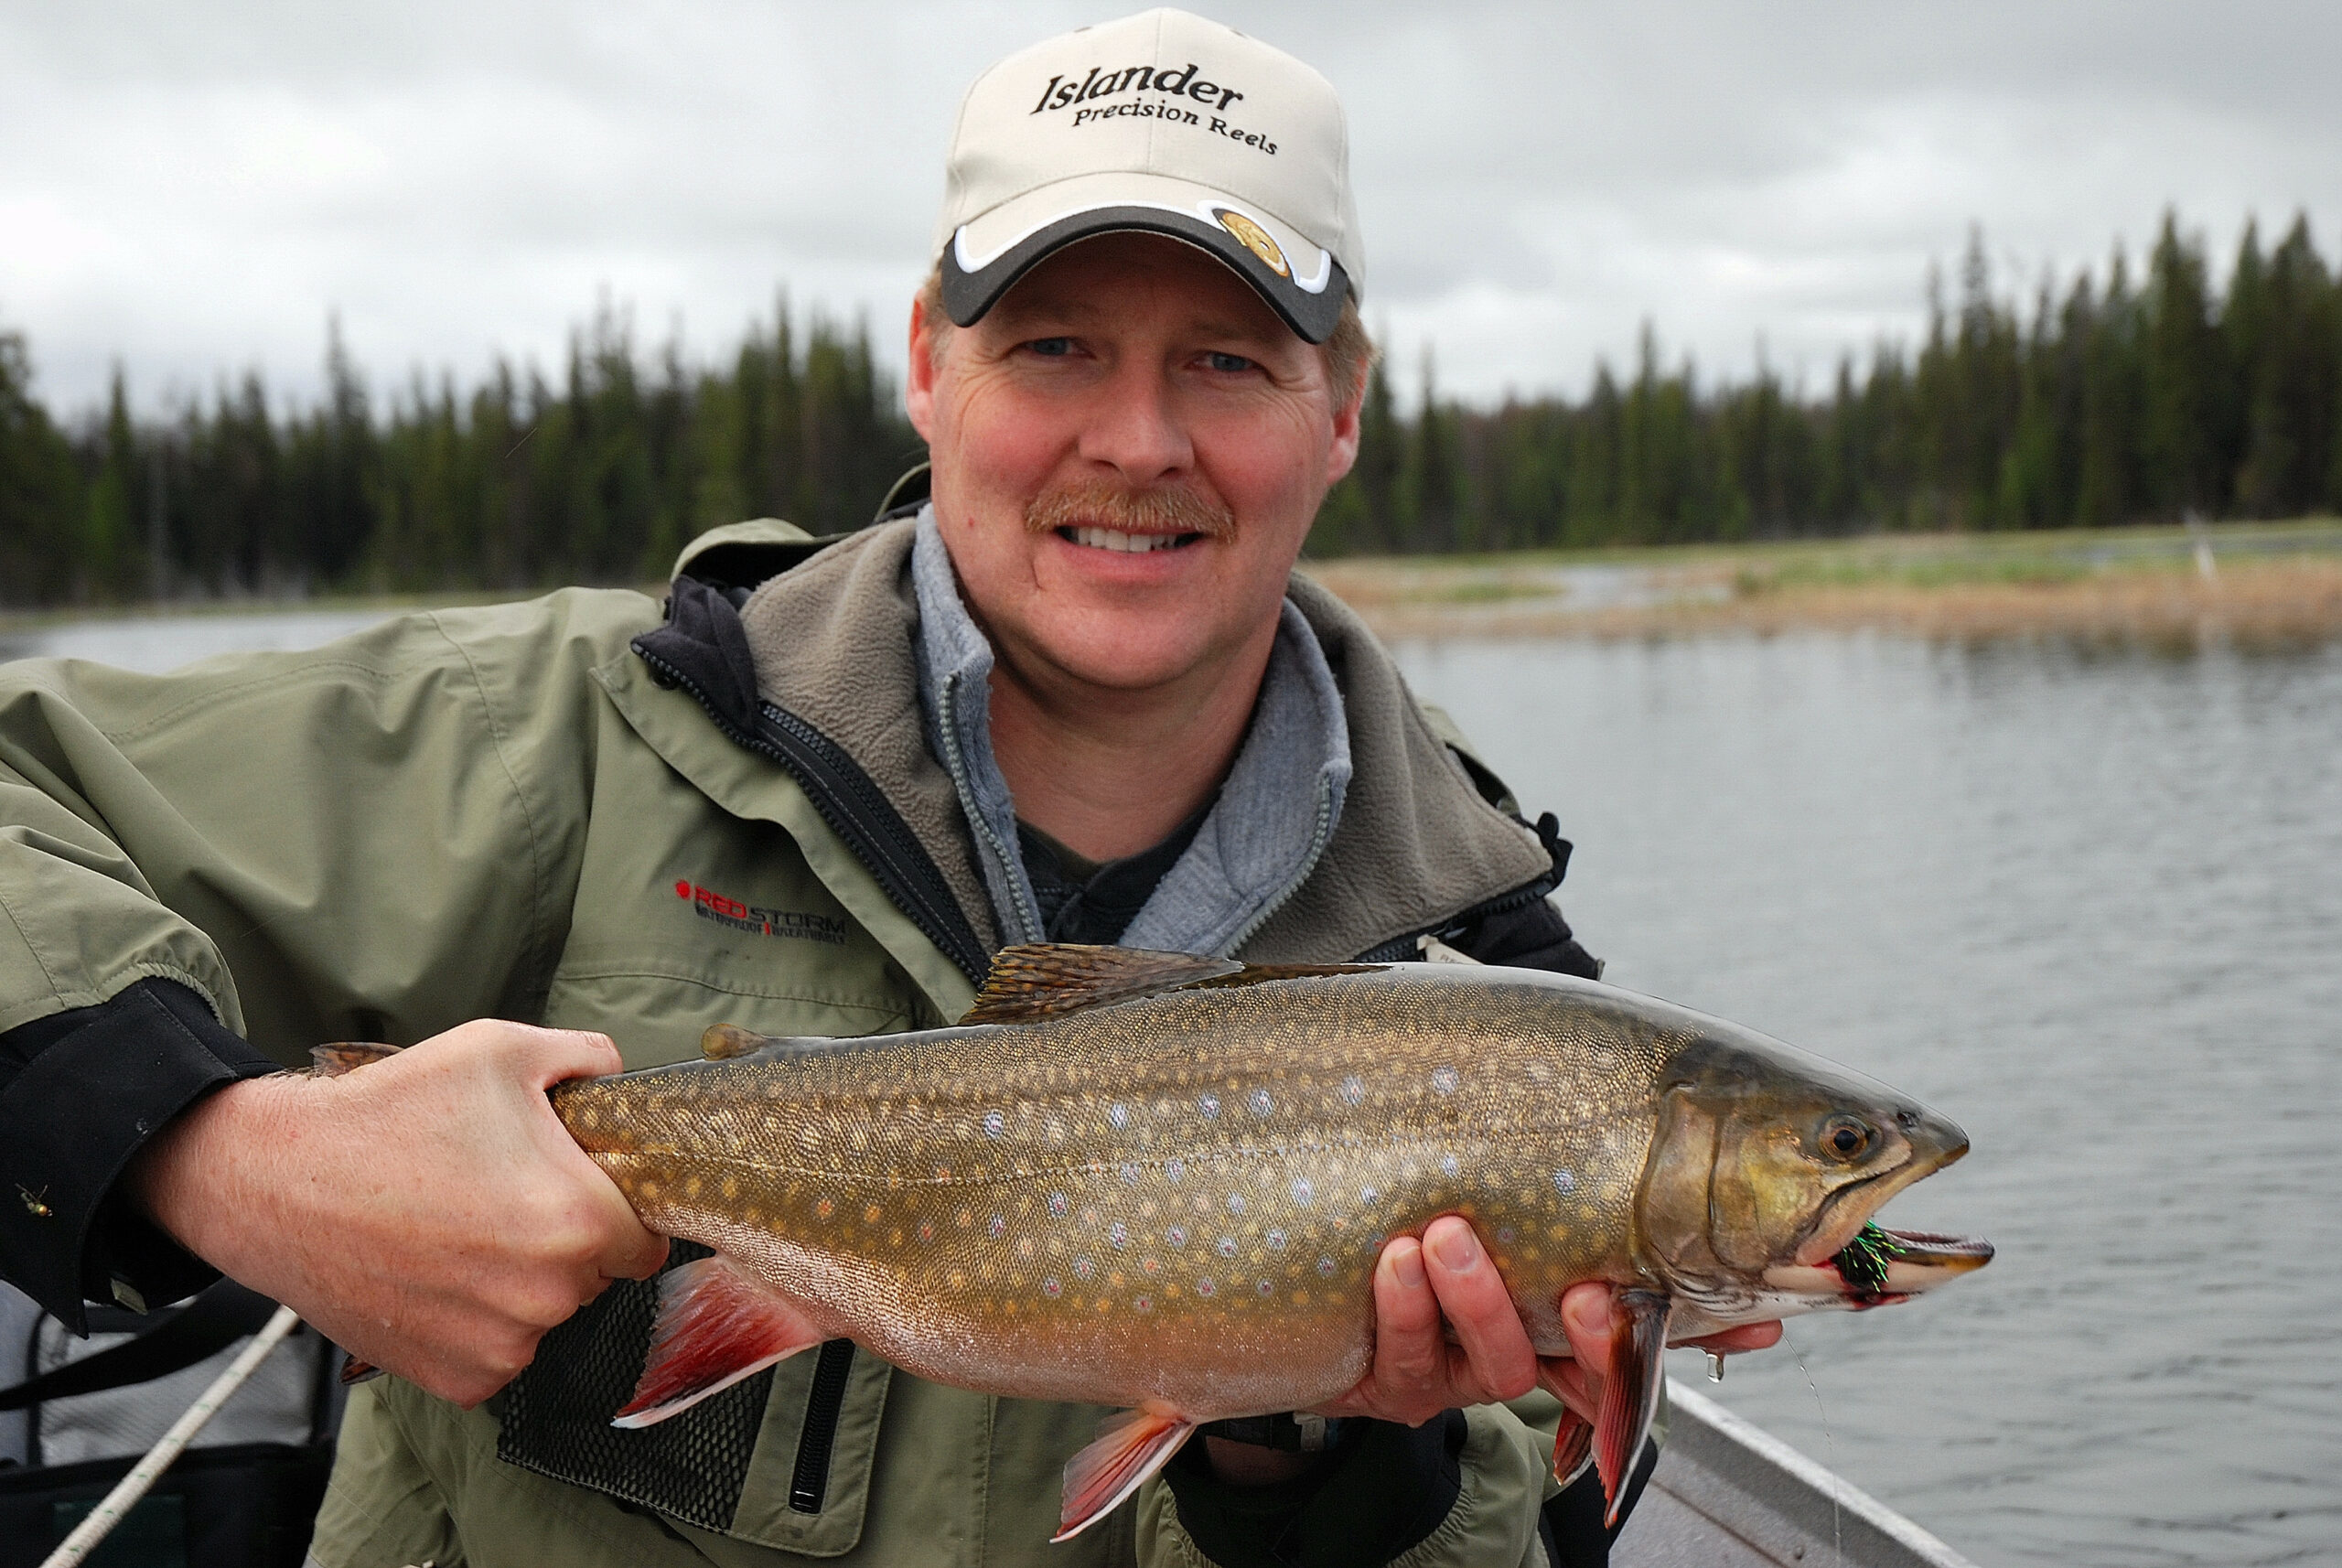 Choosing The Right Fly Line For Stillwater Trout Fishing